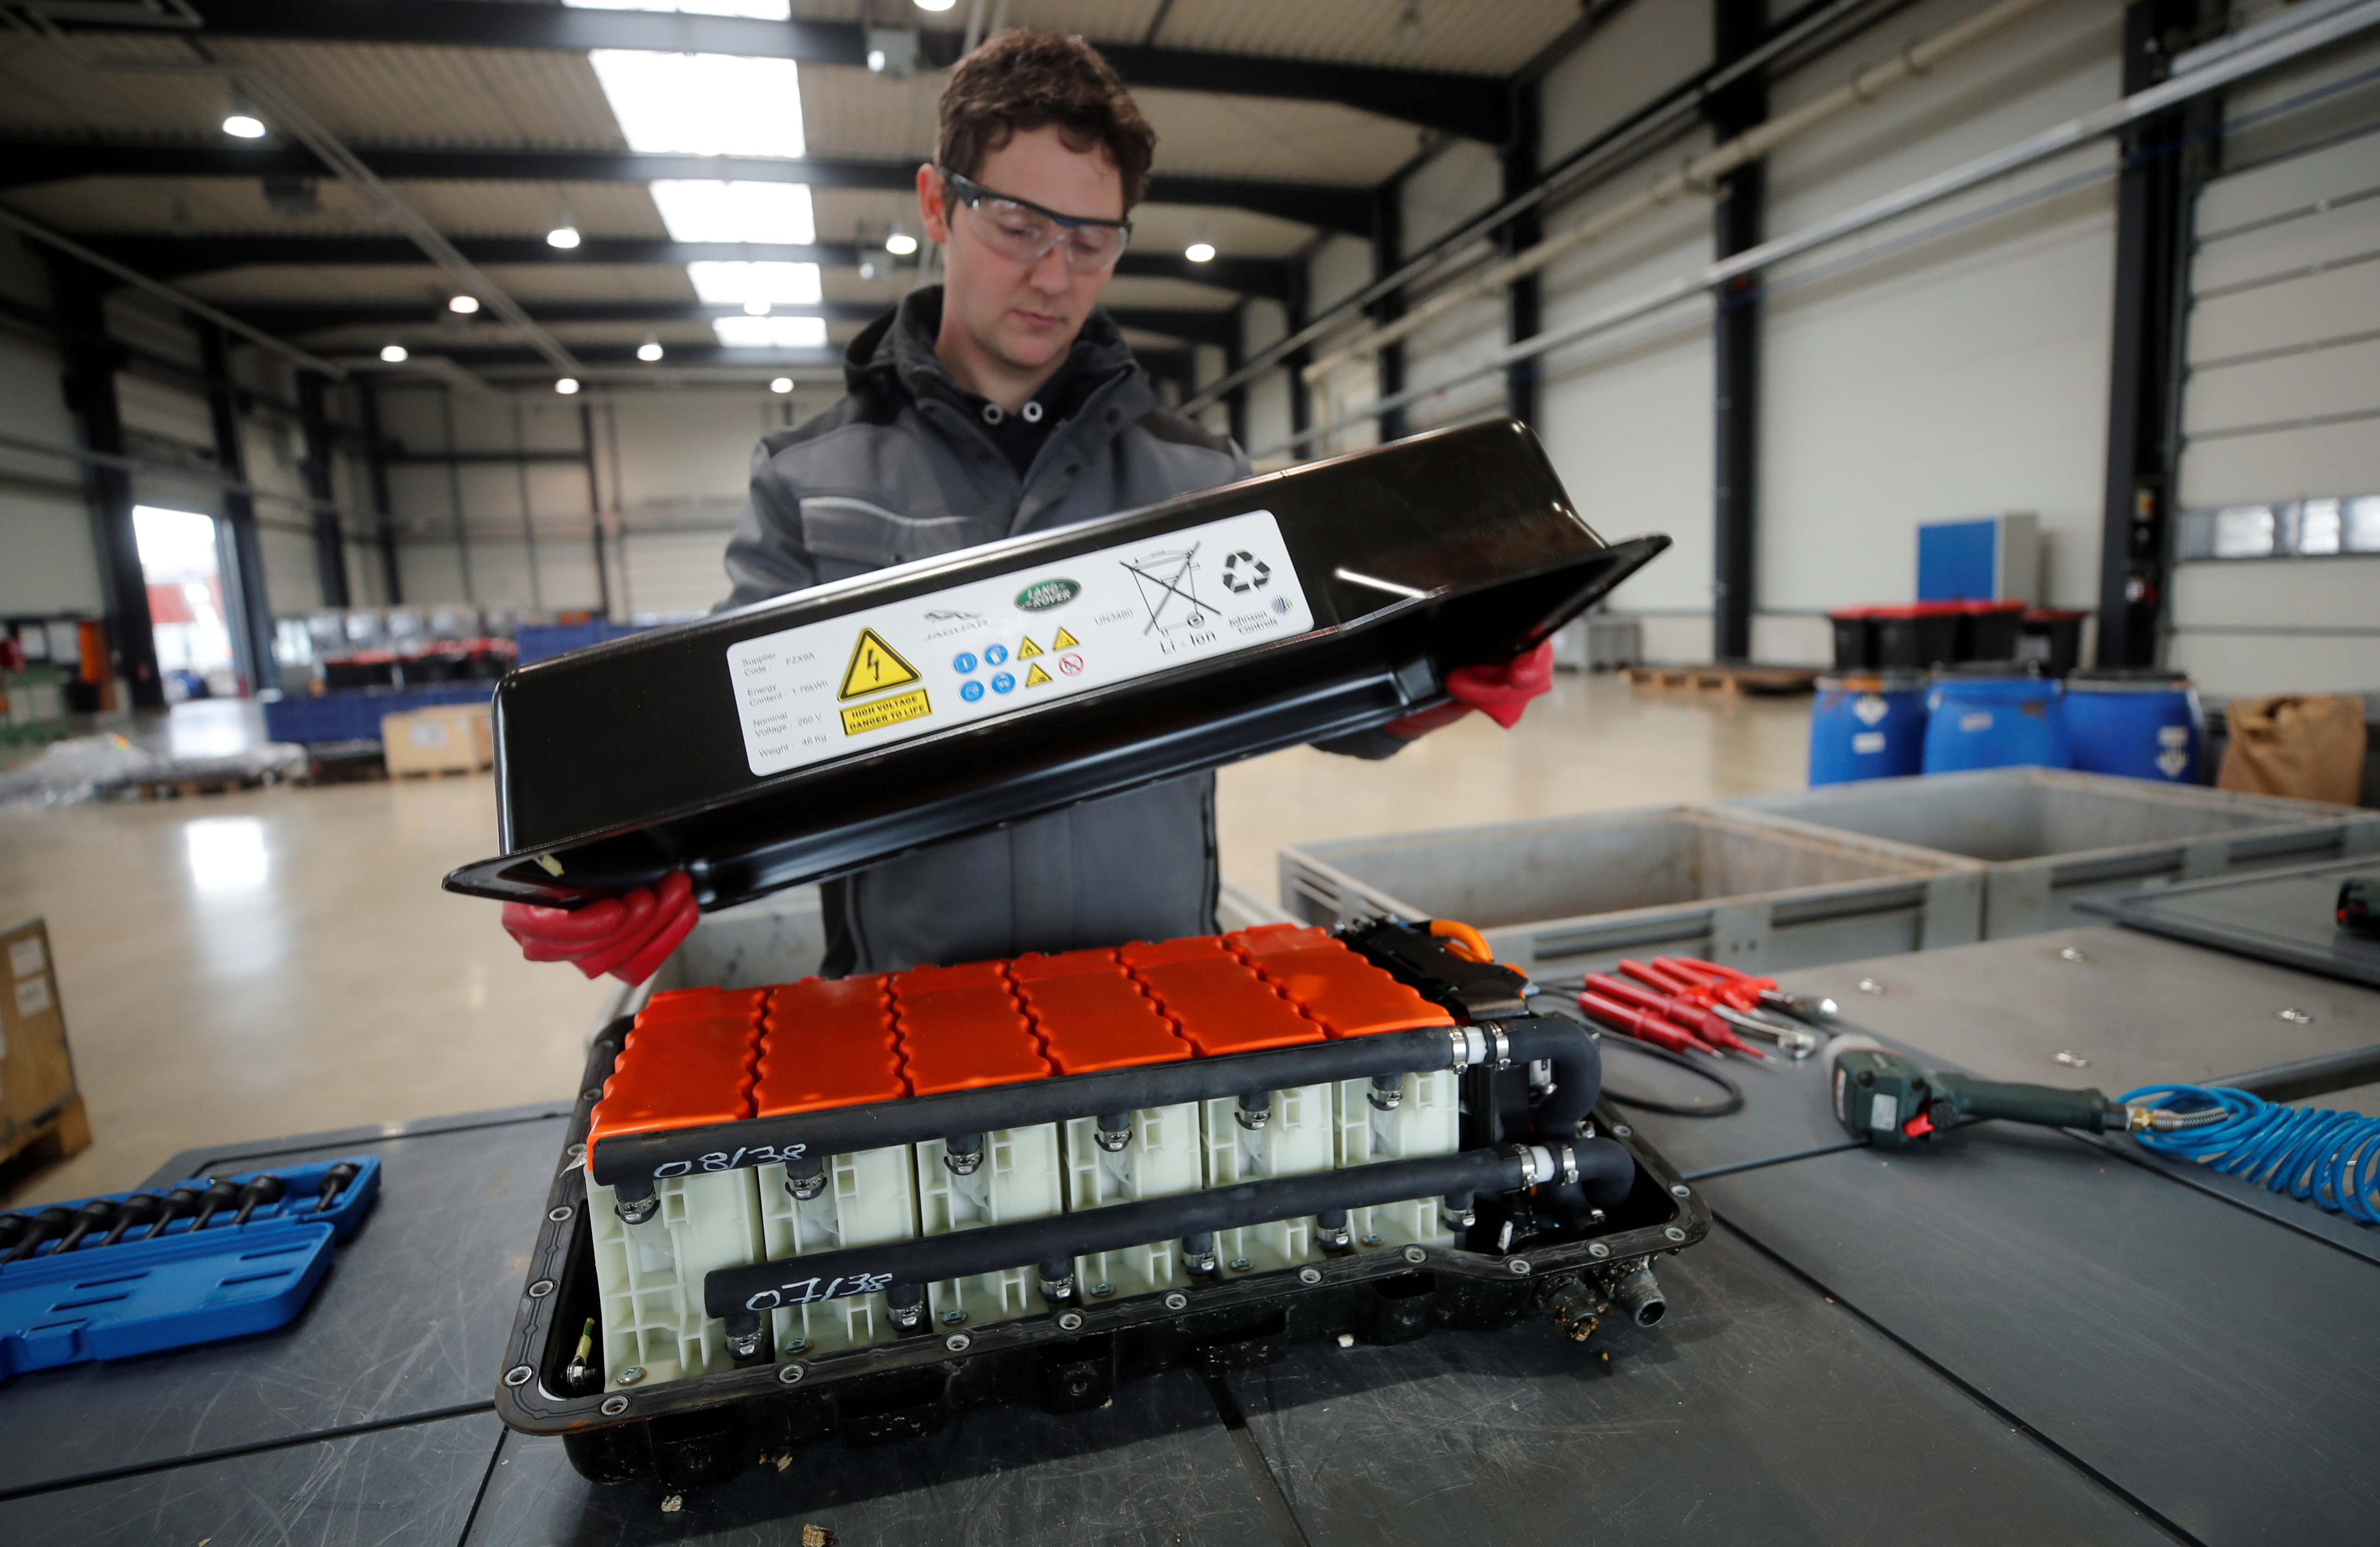 A used Lithium-ion car battery is opened before its dismantling by an employee of the German recycling firm Accurec in Krefeld, Germany, November 16, 2017. REUTERS/Wolfgang Rattay